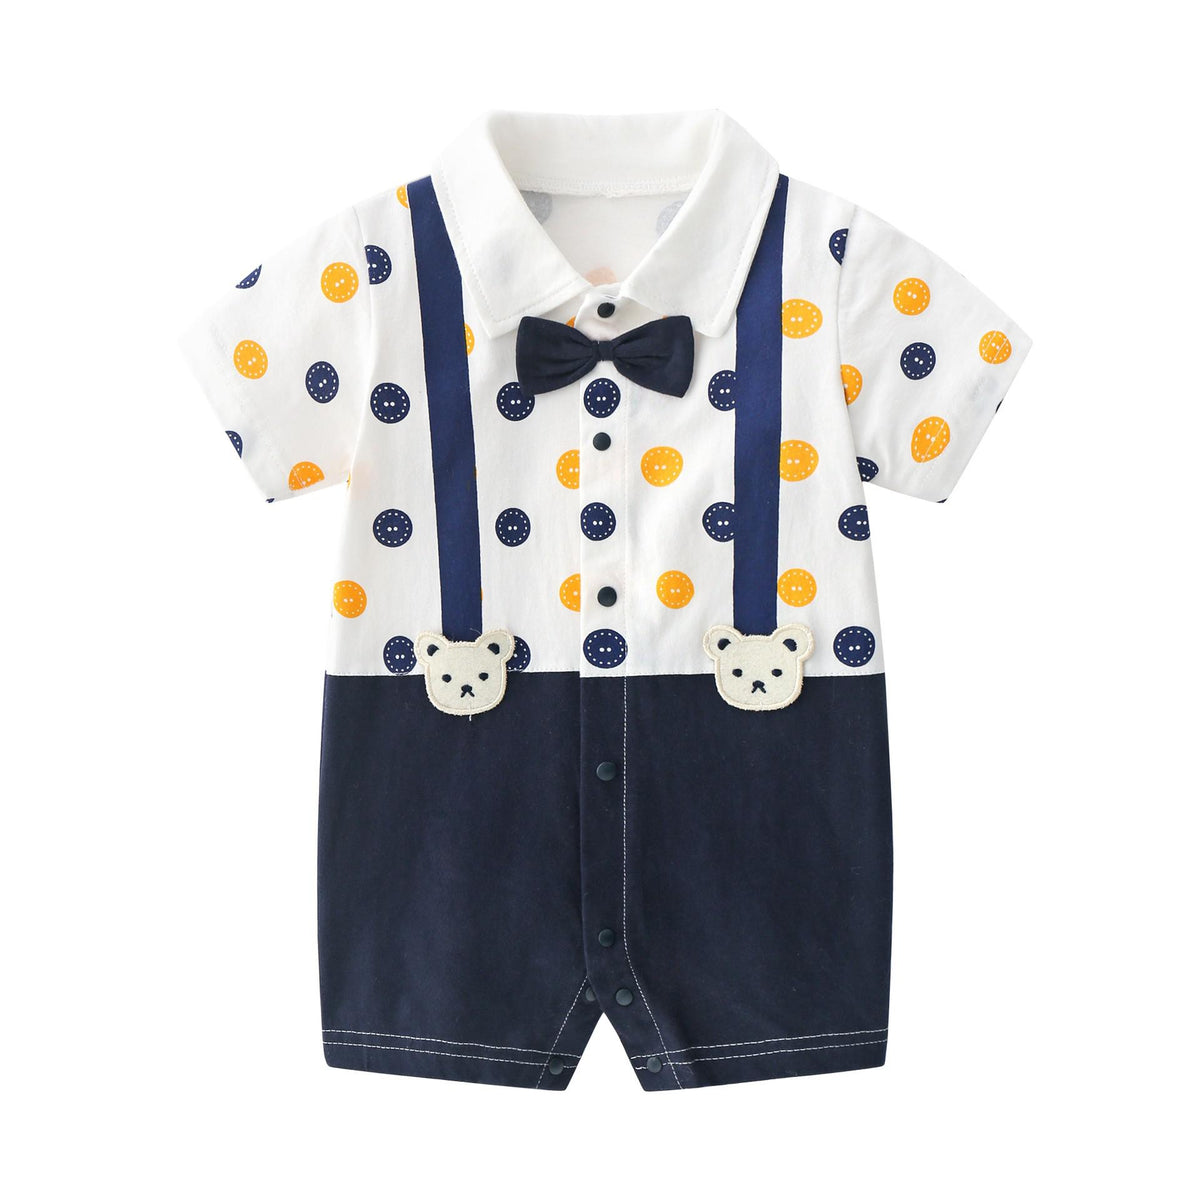 Baby Boy Clothes 2022 Toddler Costume Spring Summer Newborn Baby Clothes With Cotton Short Sleeve Kid Clothing Boy Romper